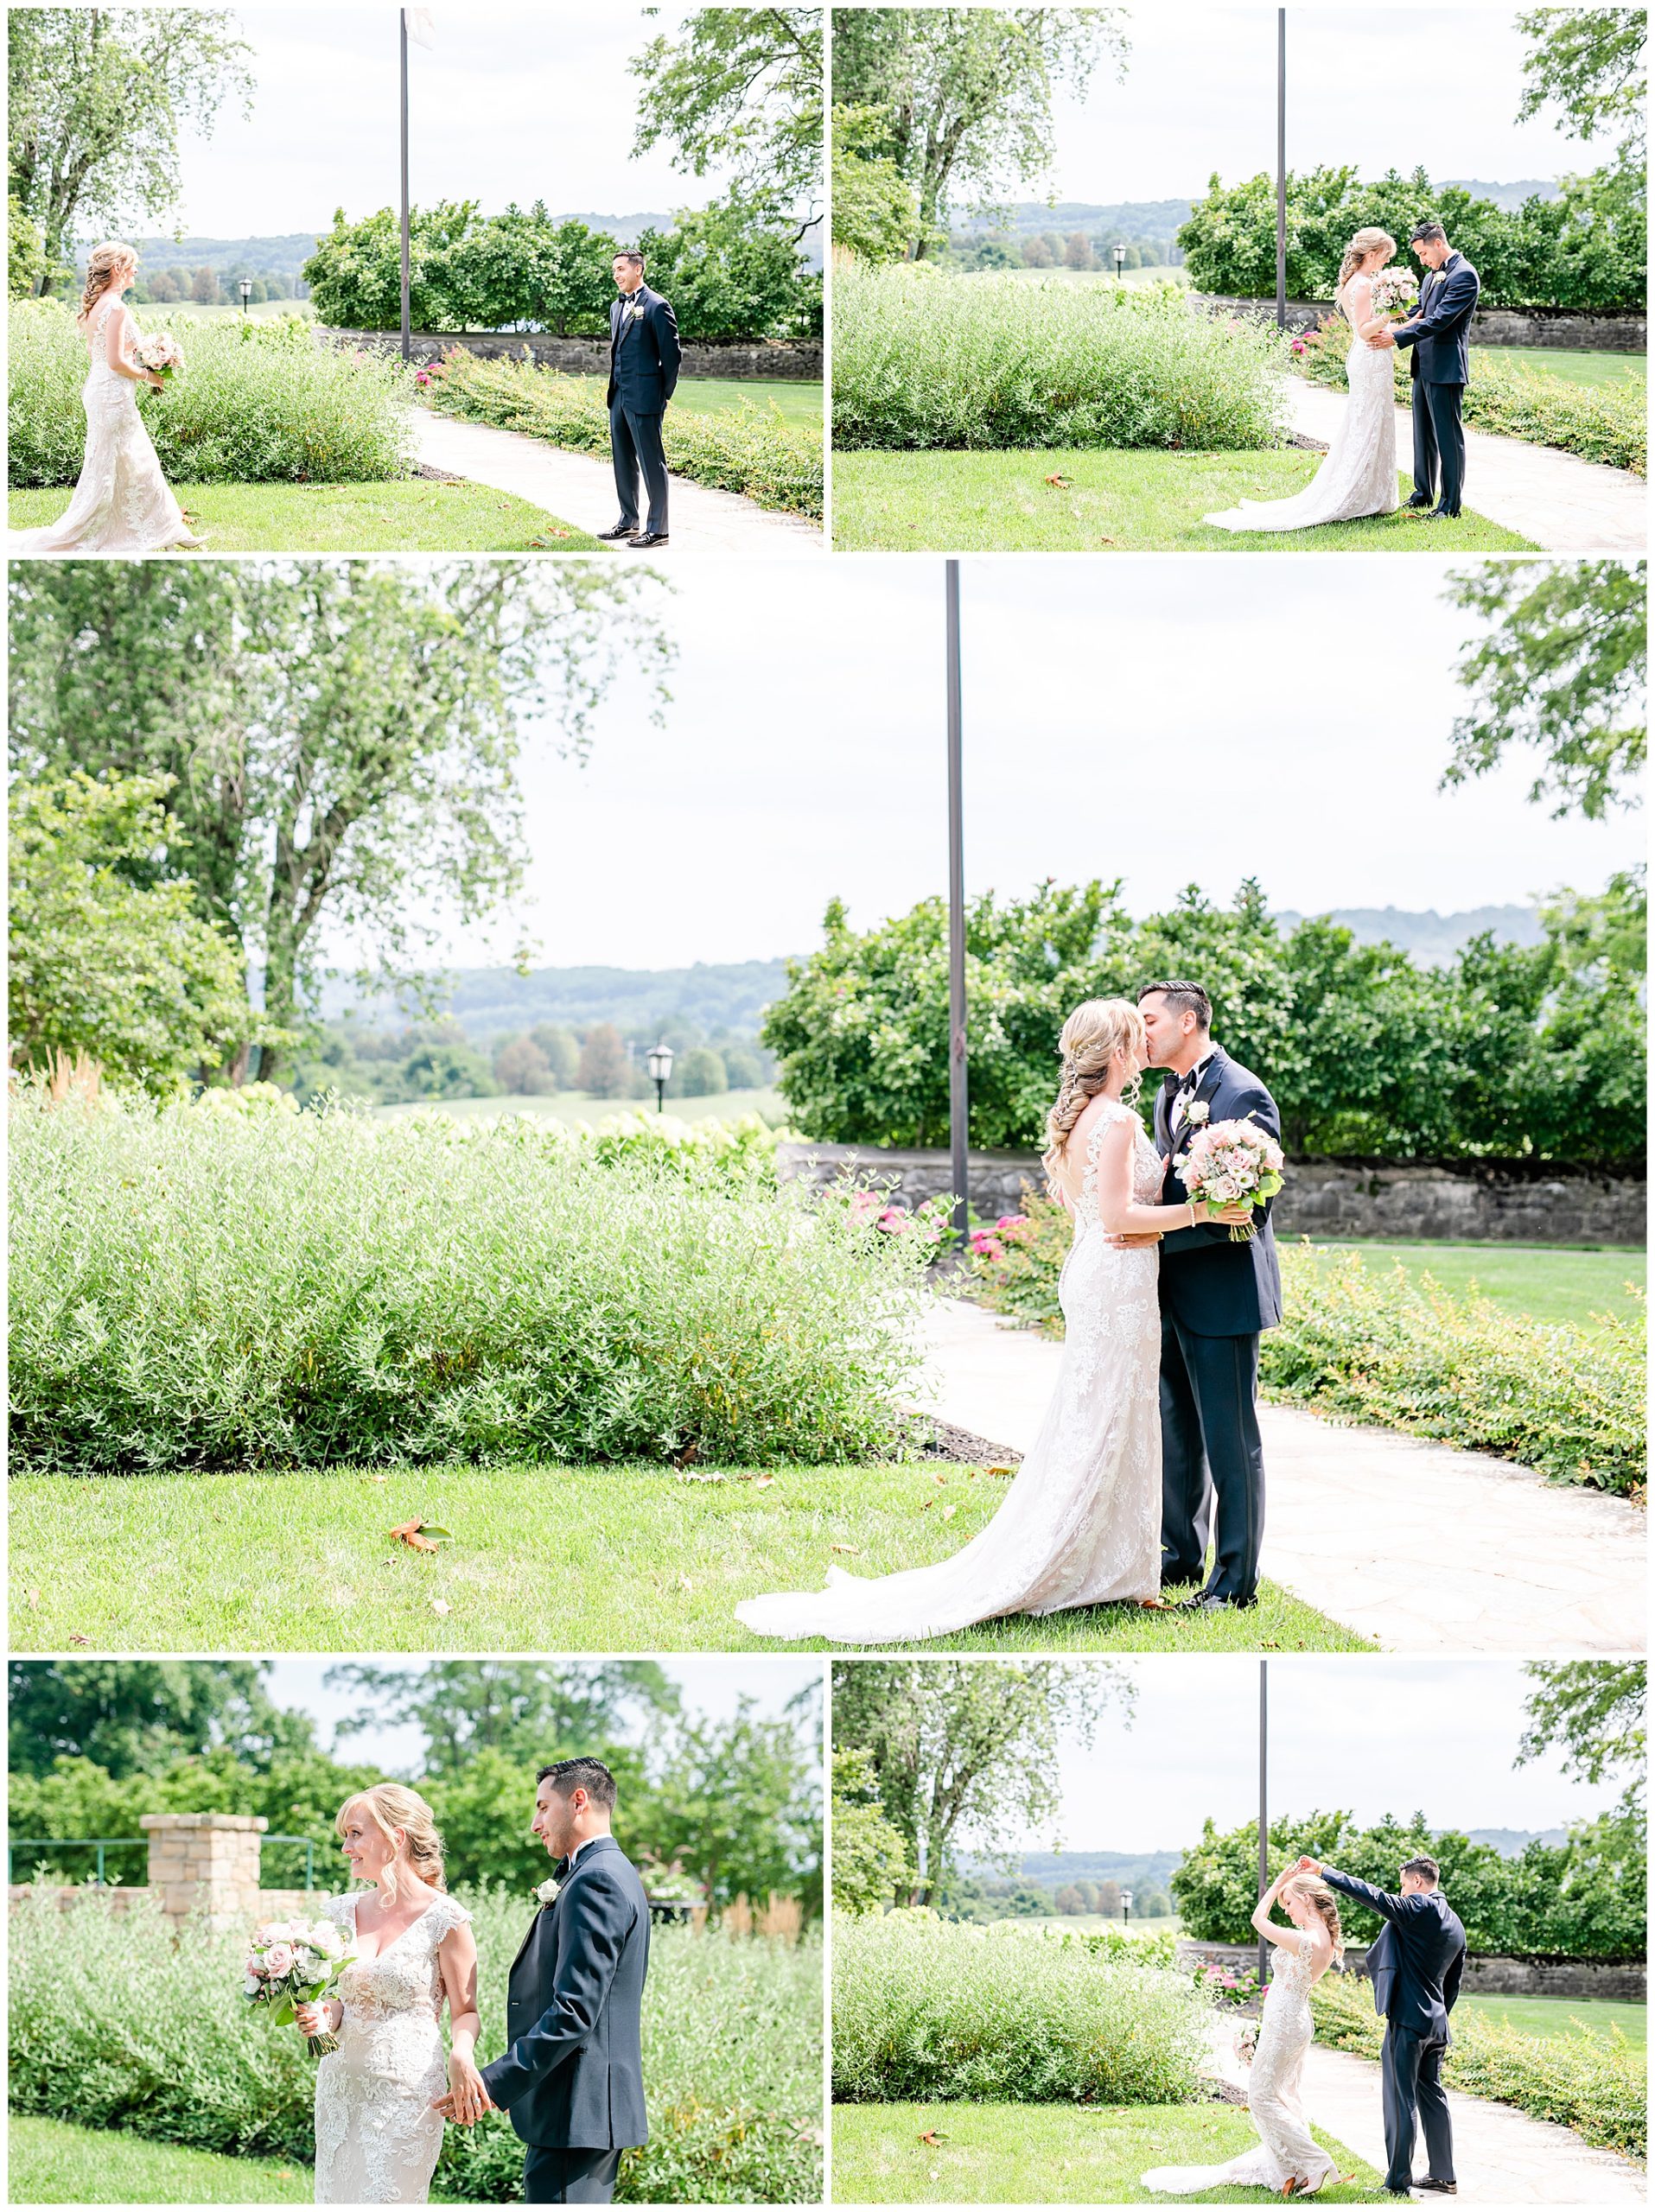 mid-summer Hayfields Country Club, Hunt Valley wedding, Baltimore wedding photographer, Rachel E.H. Photography, DC wedding photographer, summer wedding, pink and navy aesthetic, Washington DC wedding photography, Baltimore wedding photography, first look, romantic first look